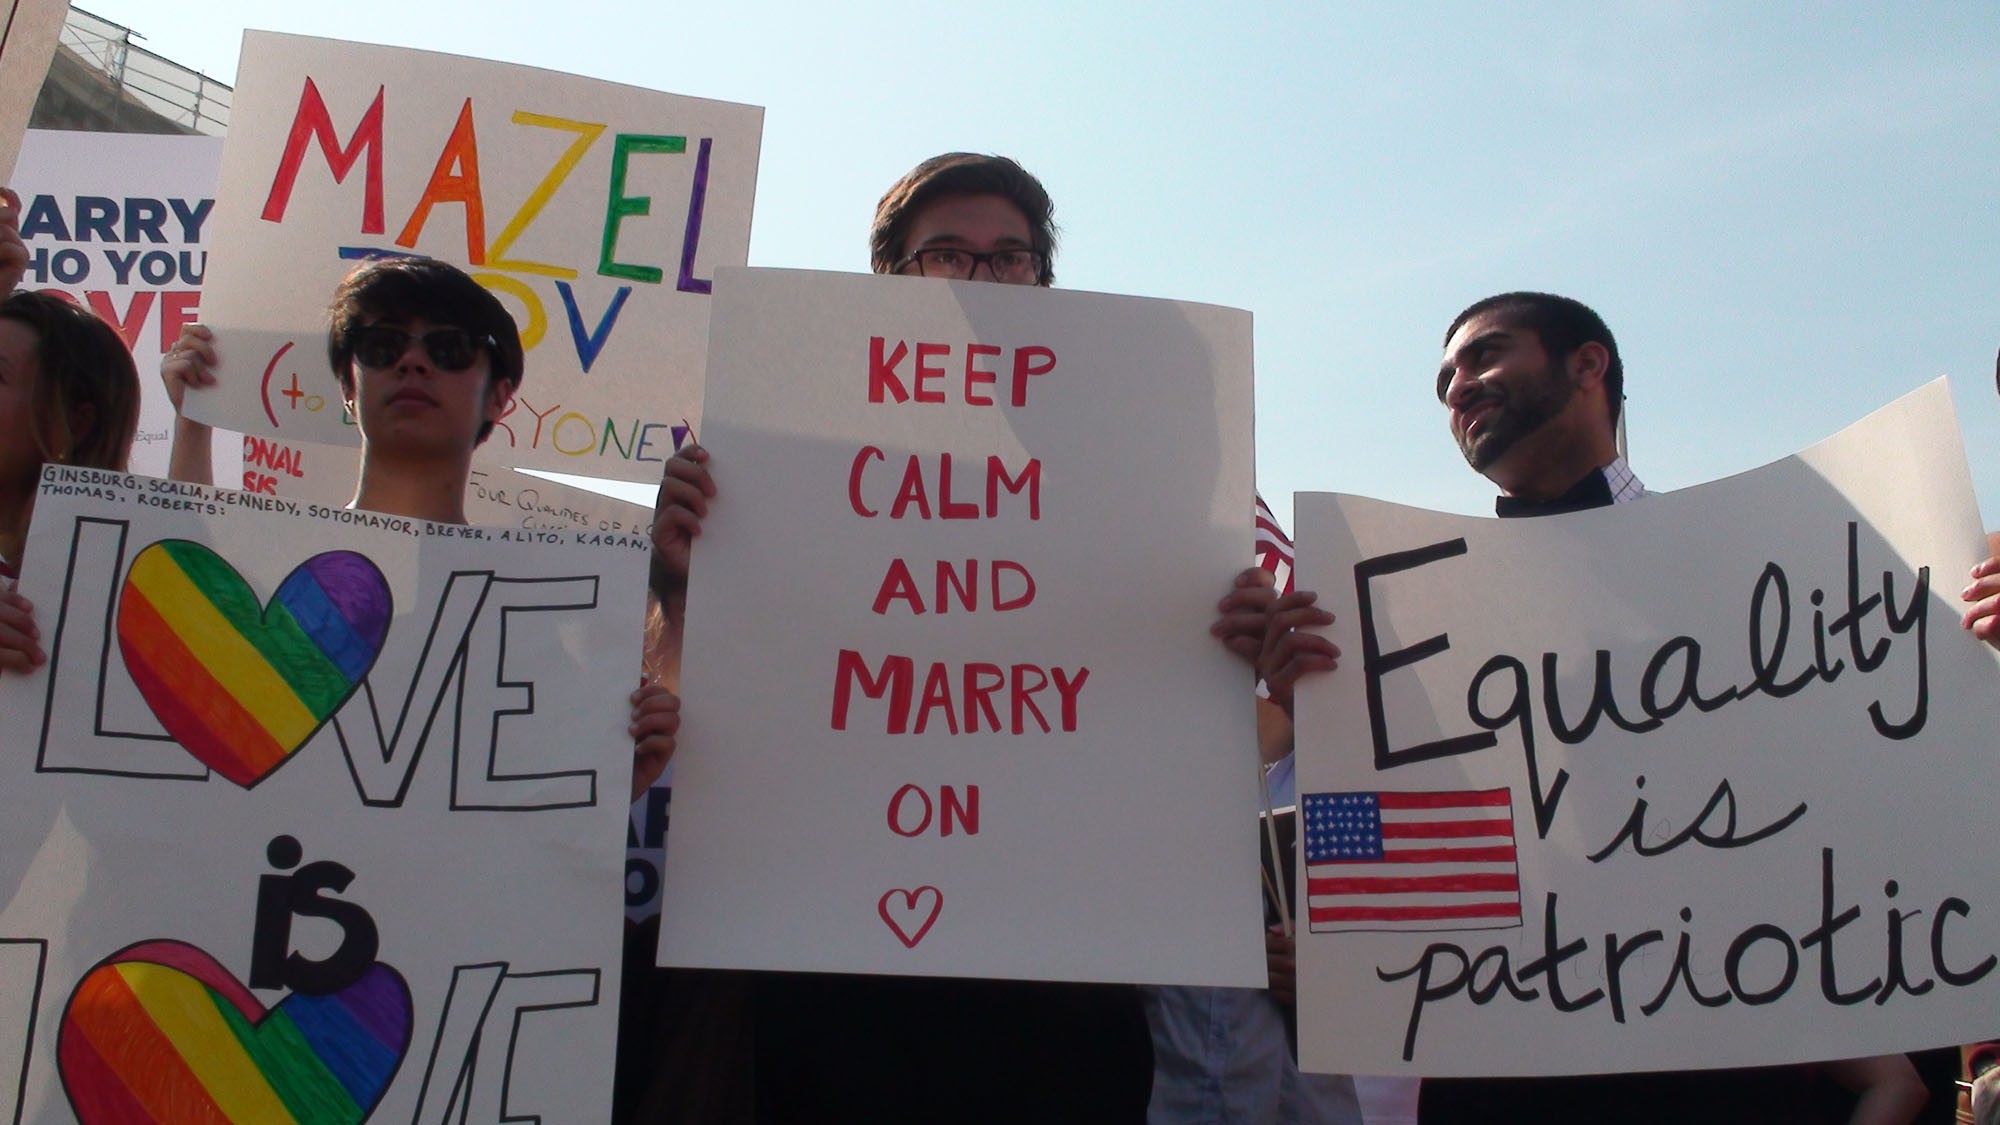 After Supreme Court rules onmarriage fight heads back to the